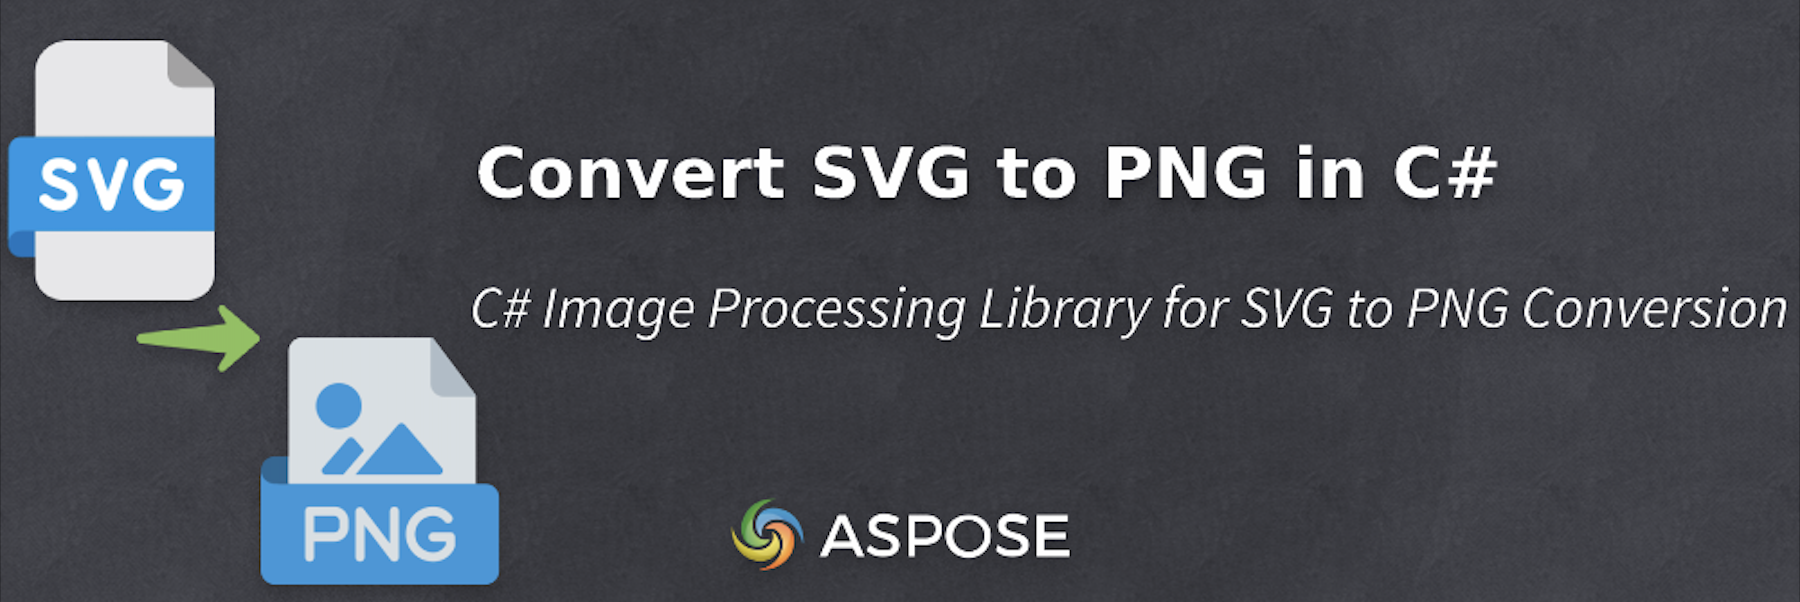 C# Image Processing Library for SVG to PNG Conversion 